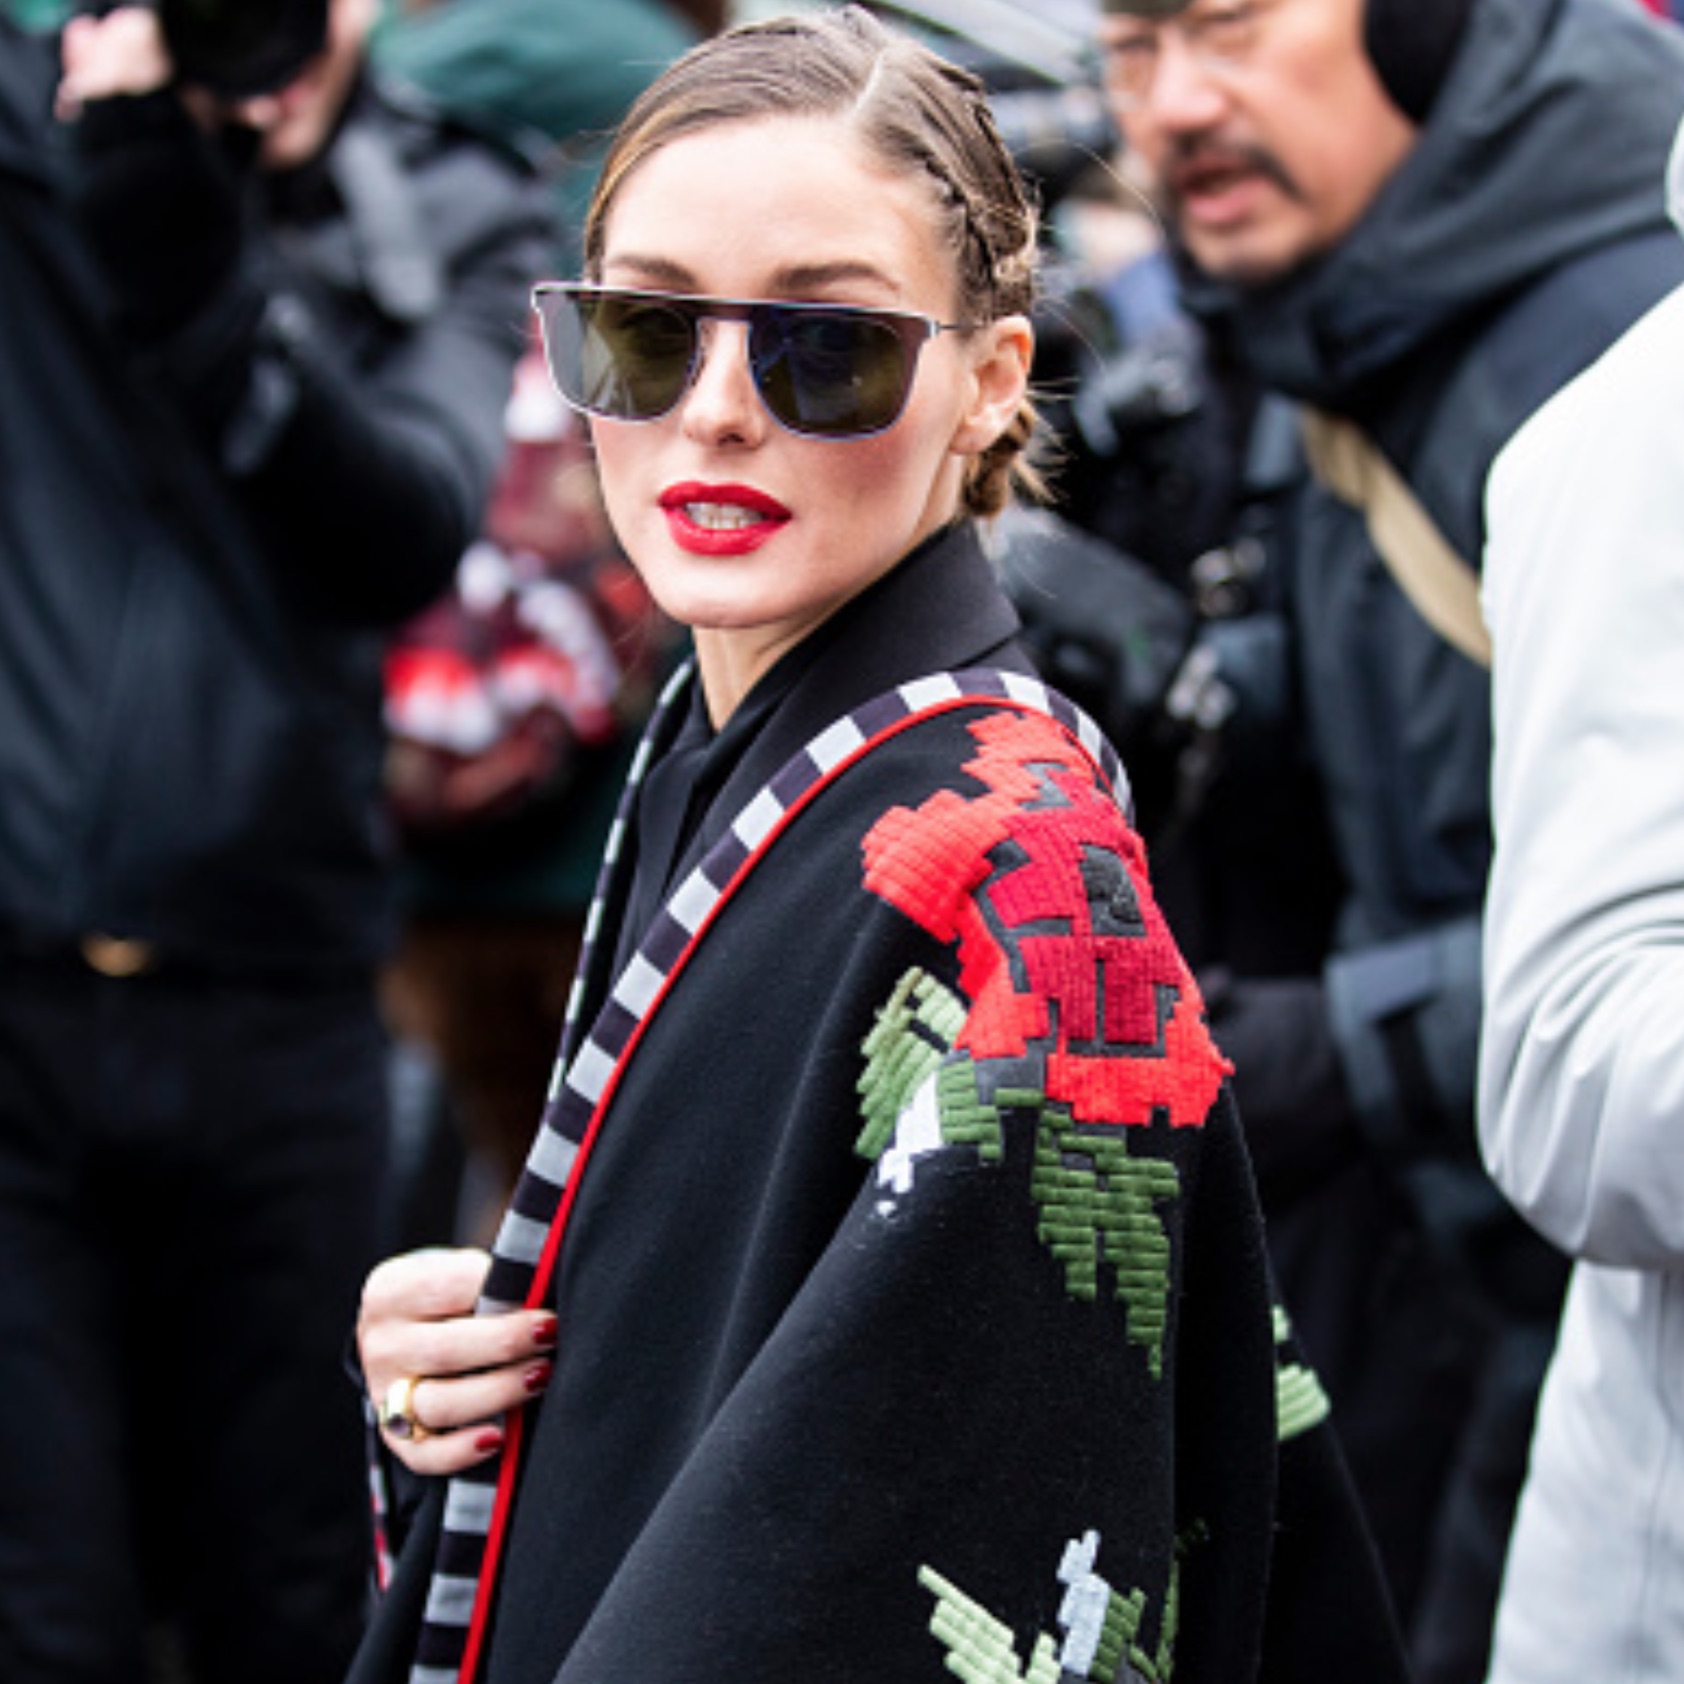 Olivia Palermo during fashion week wearing an embroidered cape